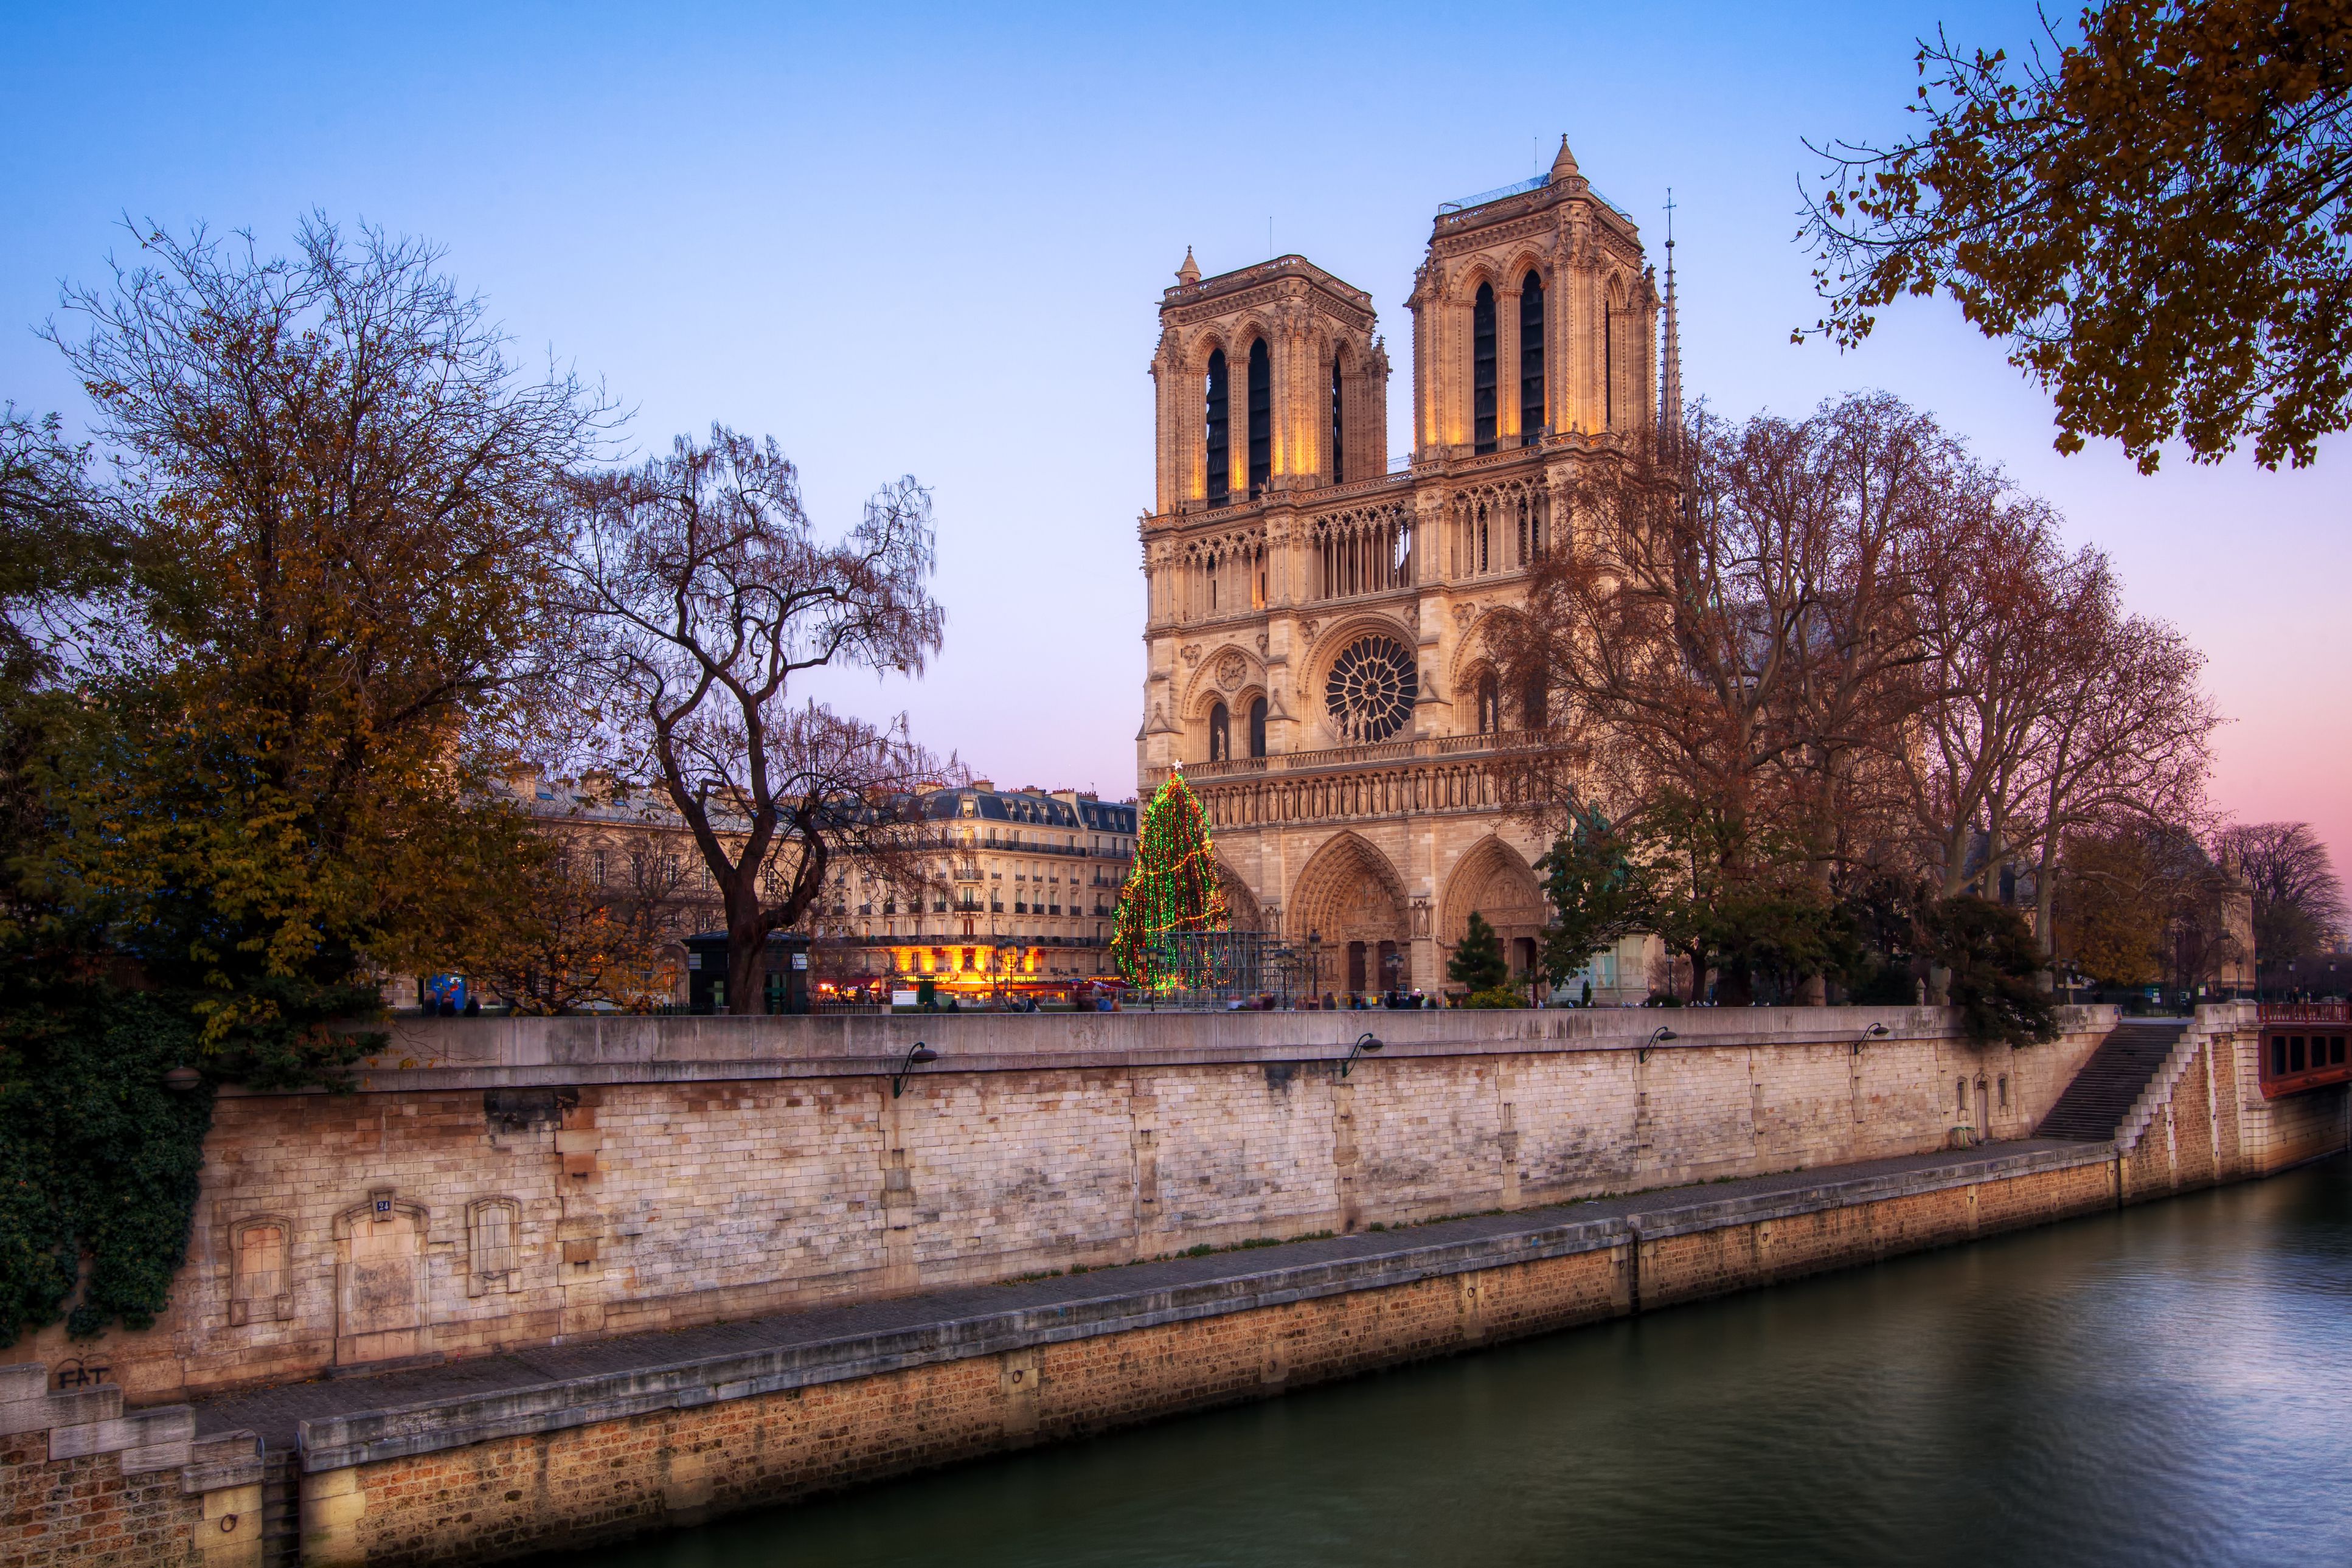 paris attractions tourist churches cathedrals cathedral dame notre sights france things moment visit popular inspiration dusk tripsavvy daniel joe getty